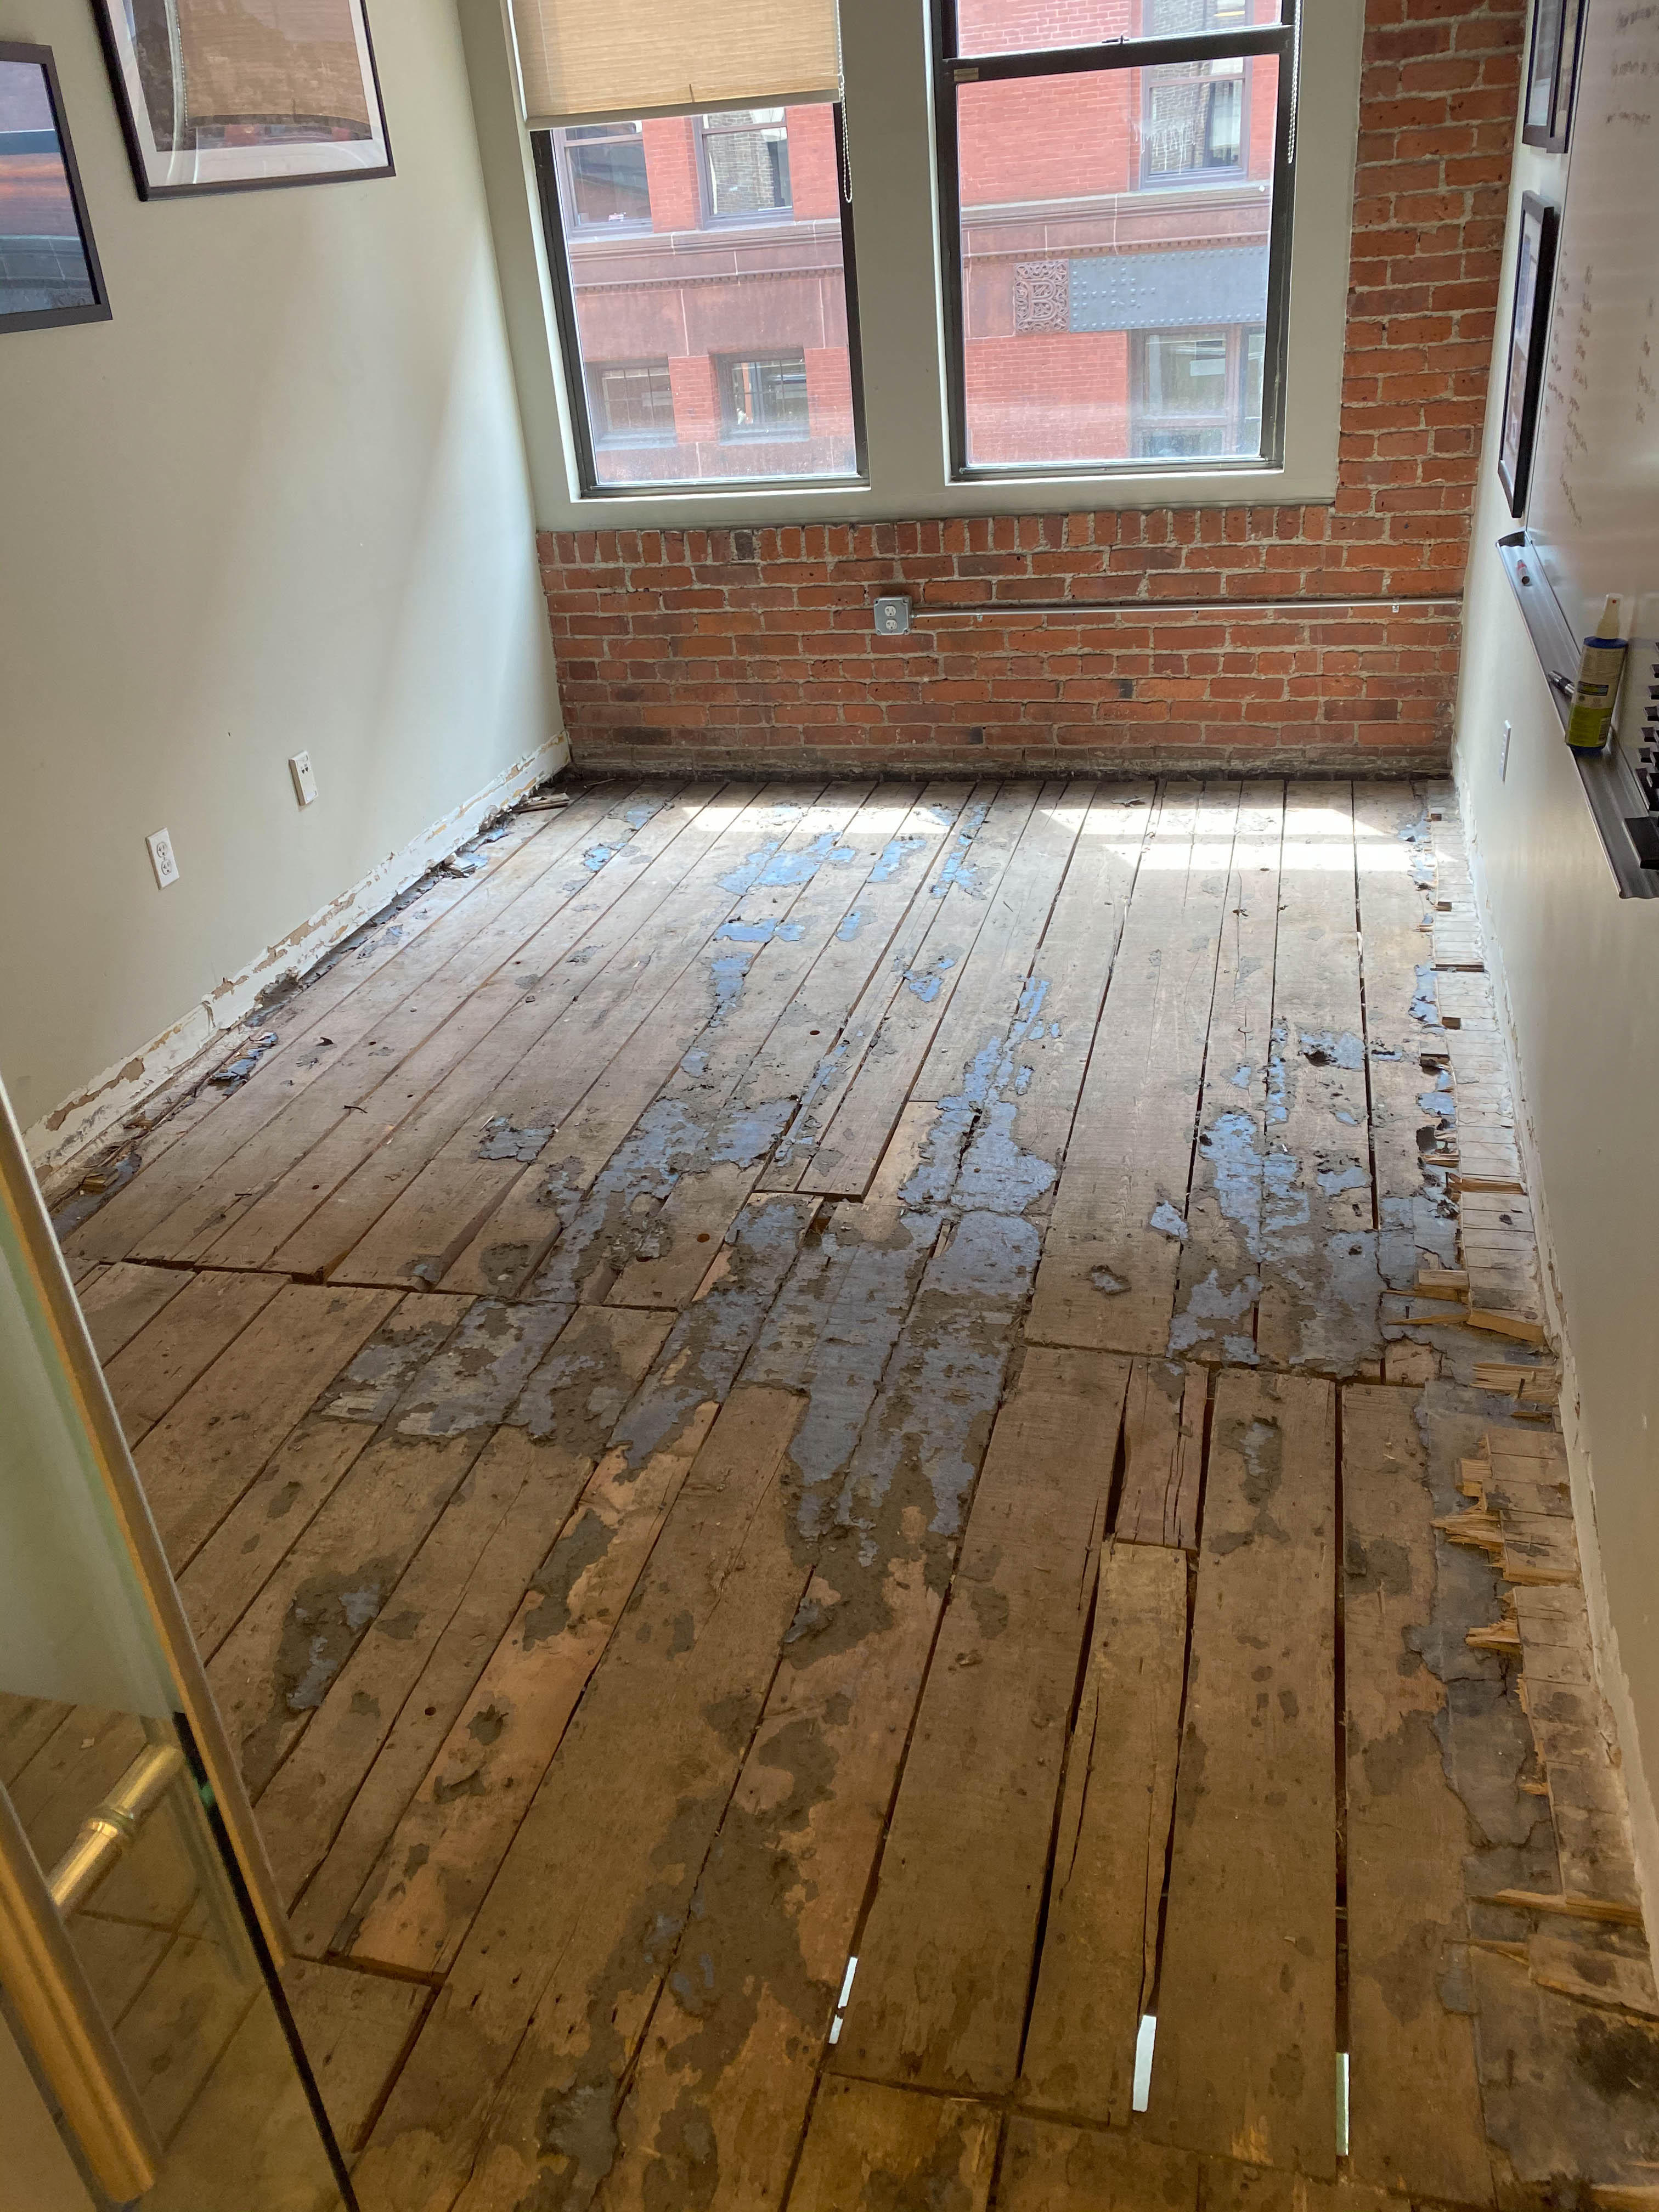 Removed flooring exposing subfloor in a commercial property.